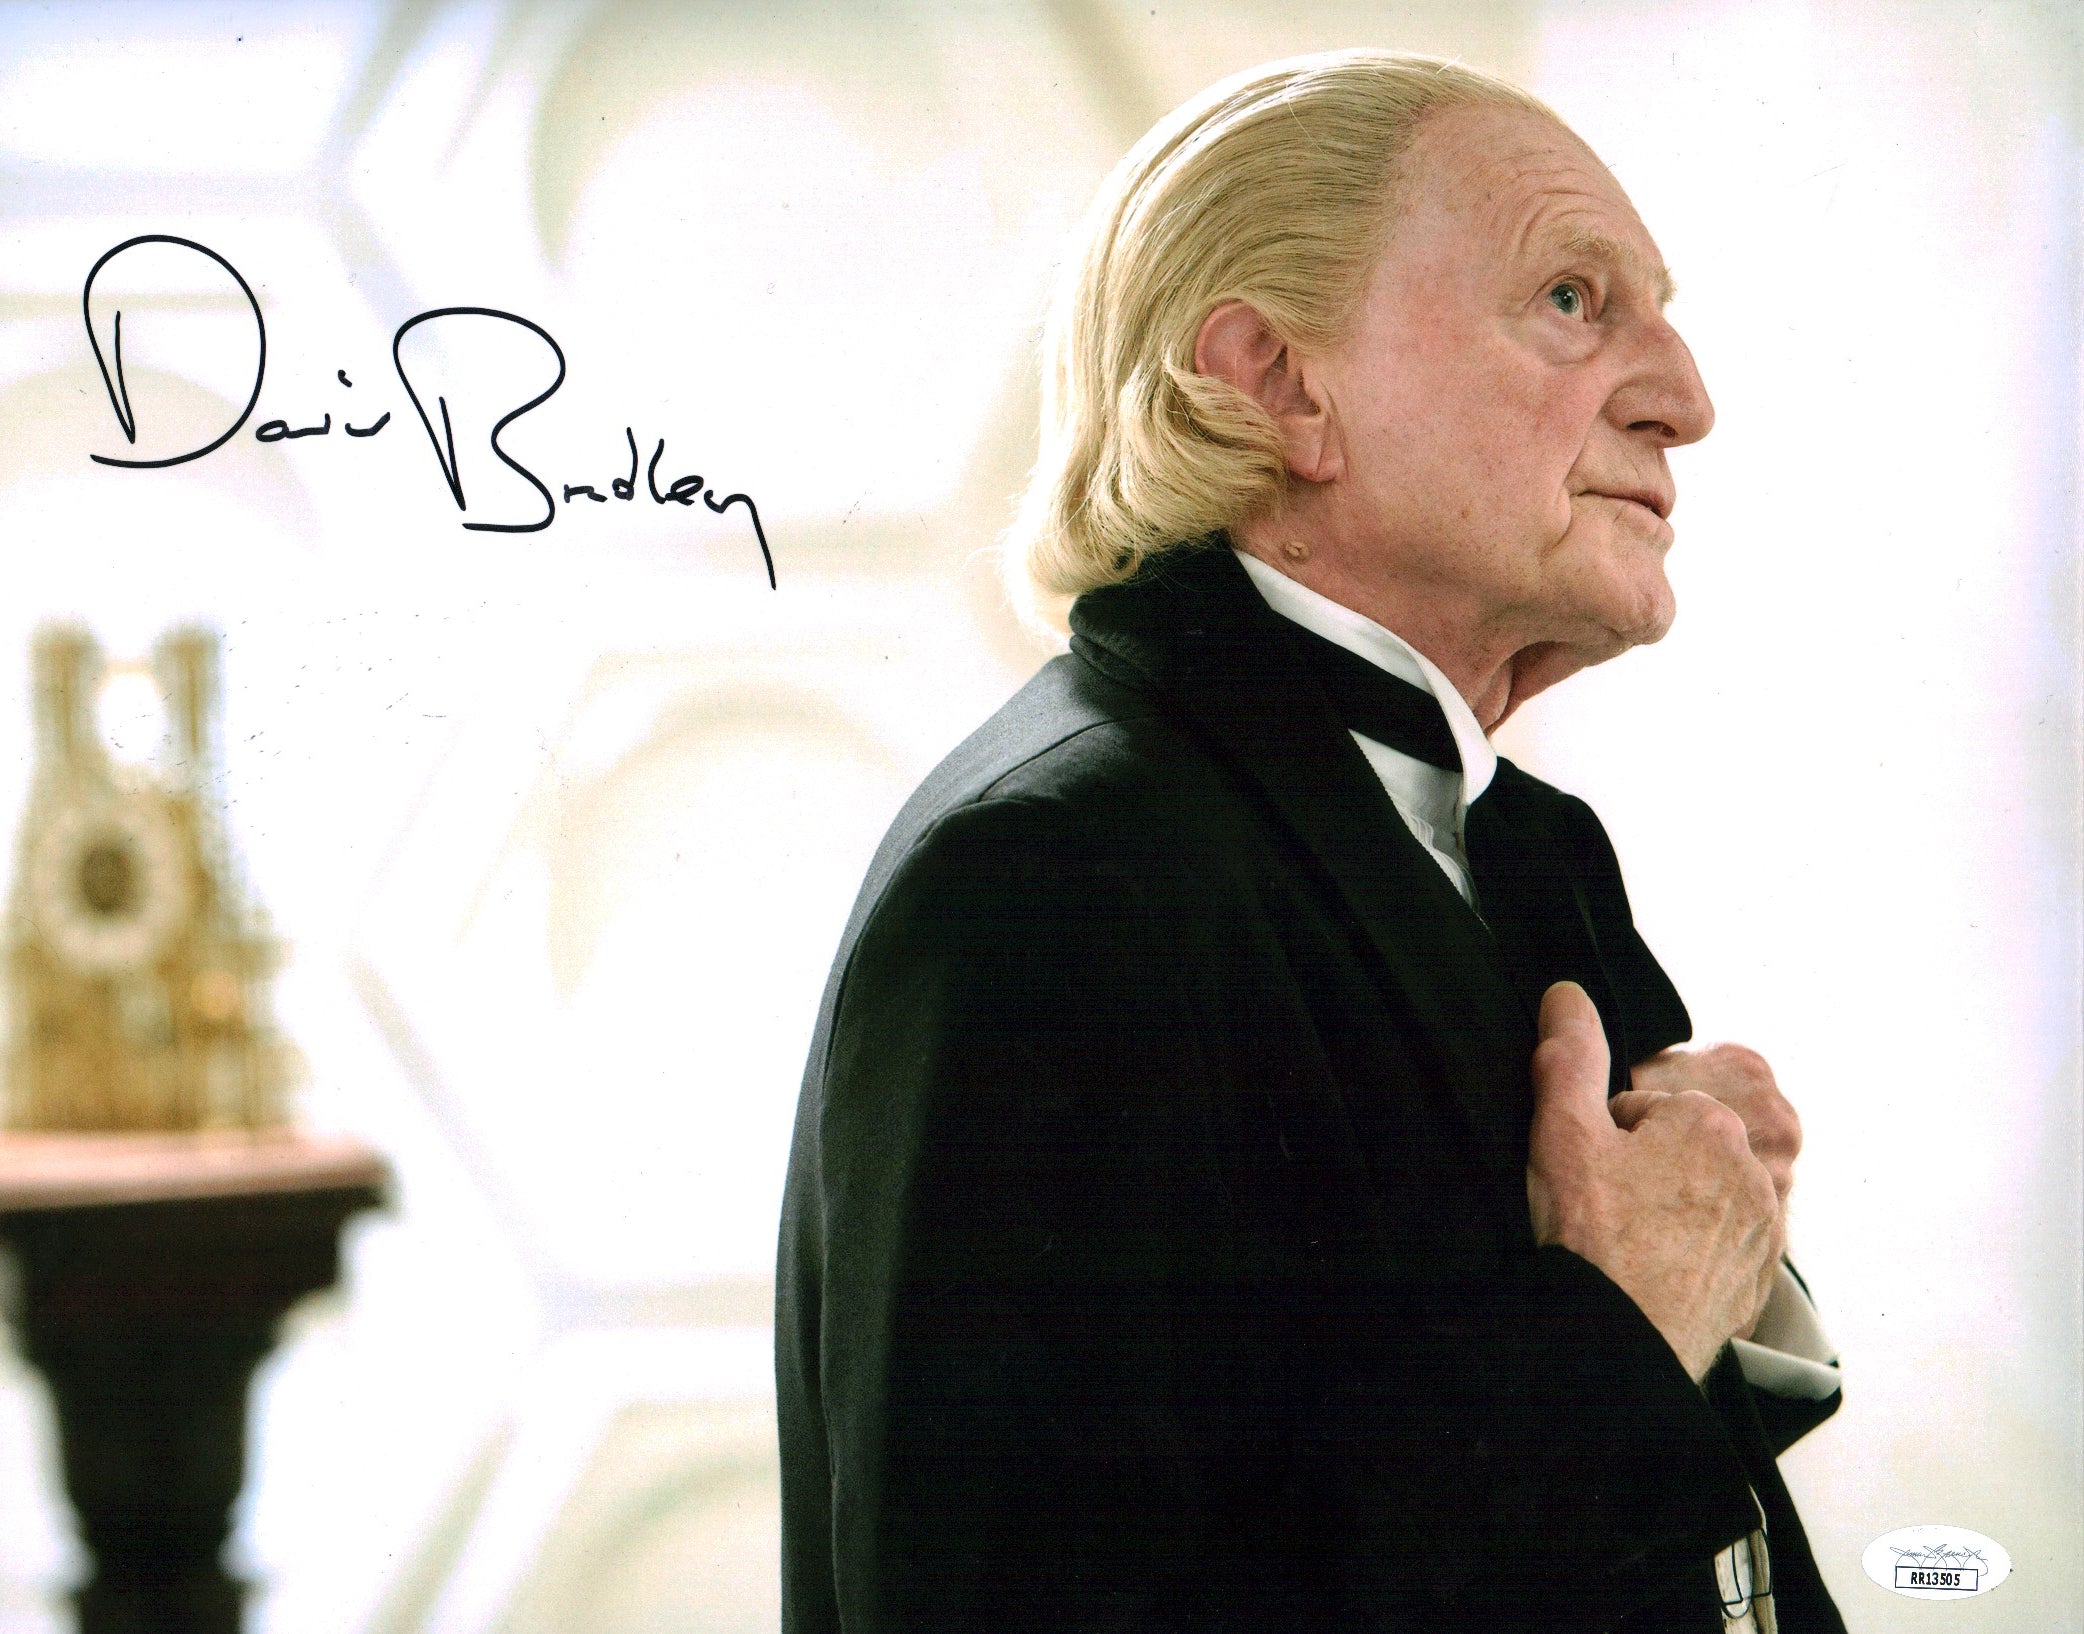 David Bradley Doctor Who 11x14 Photo Poster Signed JSA COA Certified Autograph GalaxyCon